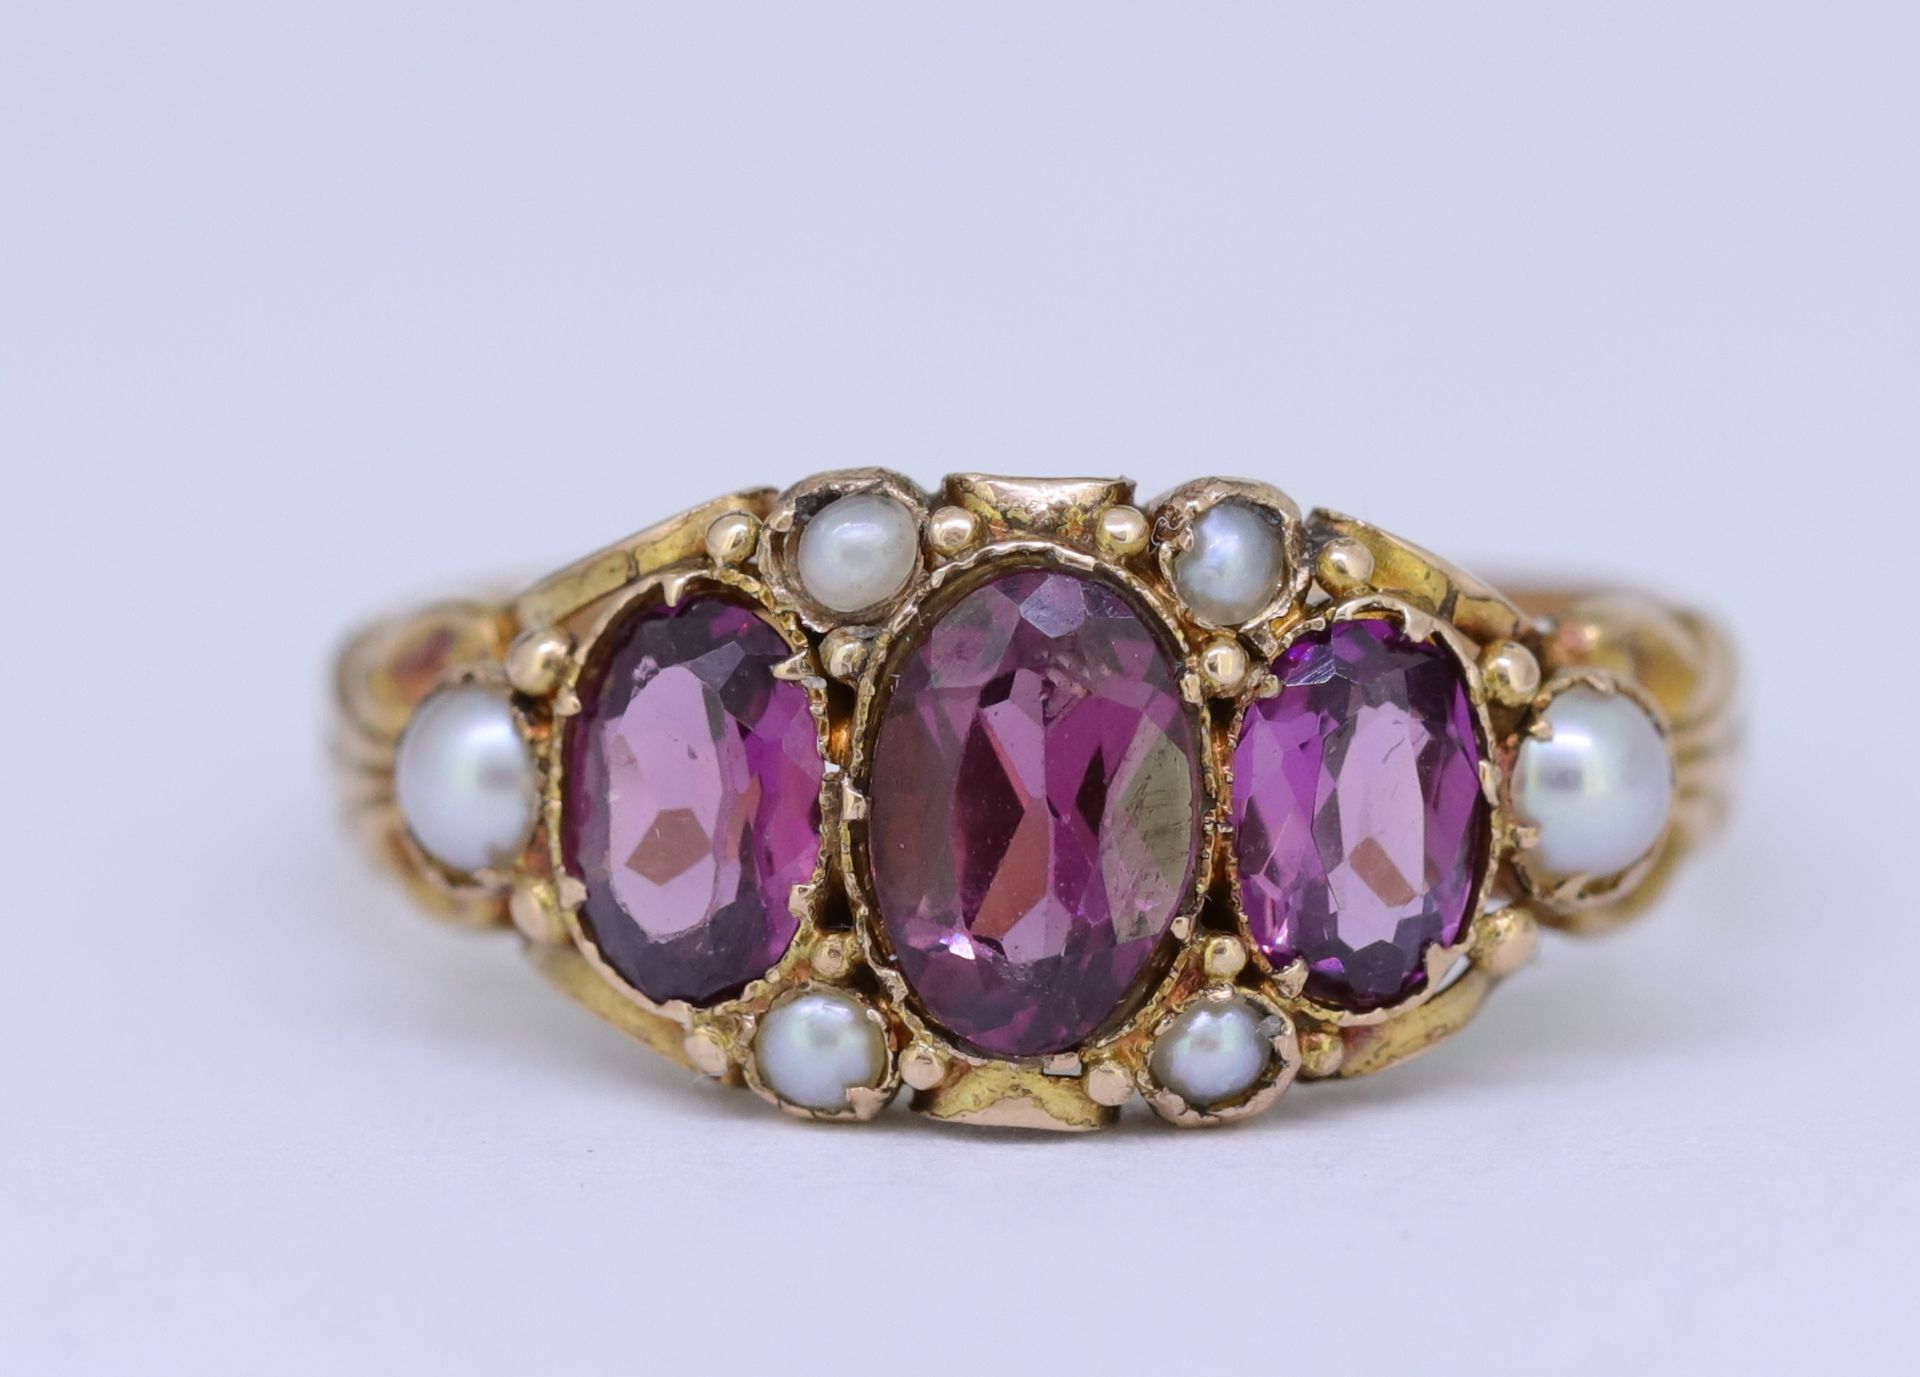 ANTIQUE AMETHYST AND PEARL RING